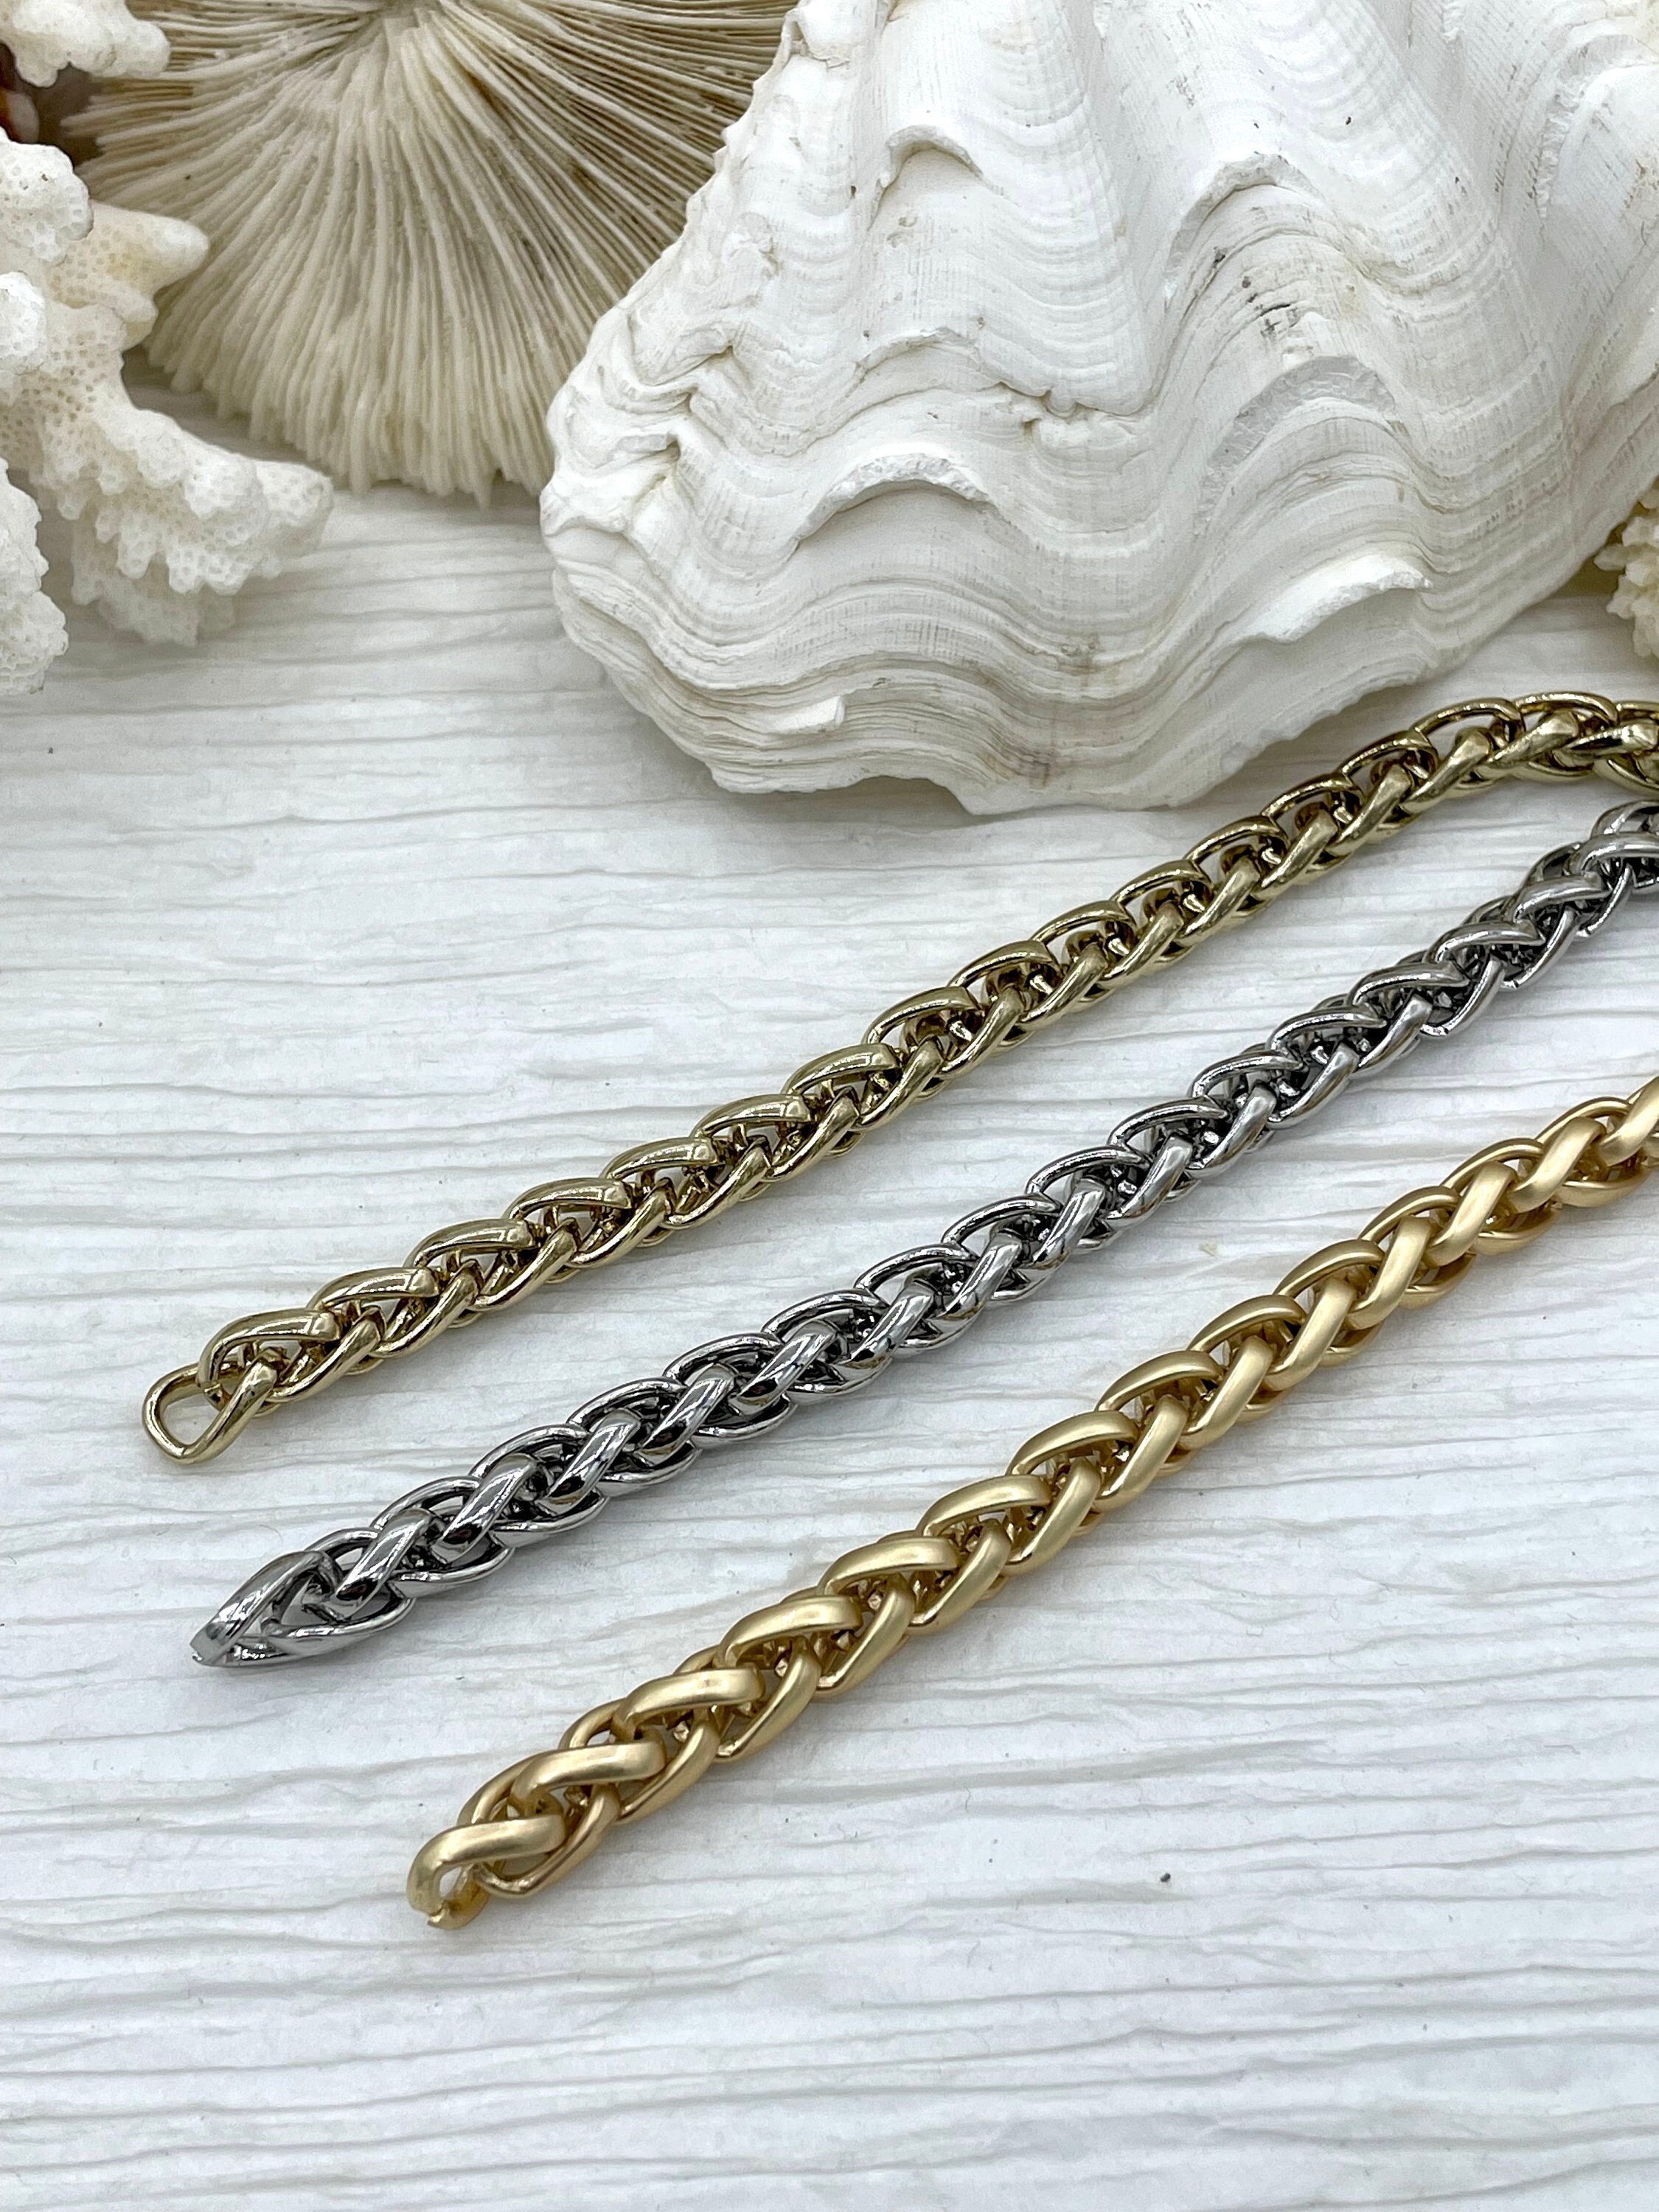 Large Braided Chain Strap Wheat-style Links Design GOLD Luxury